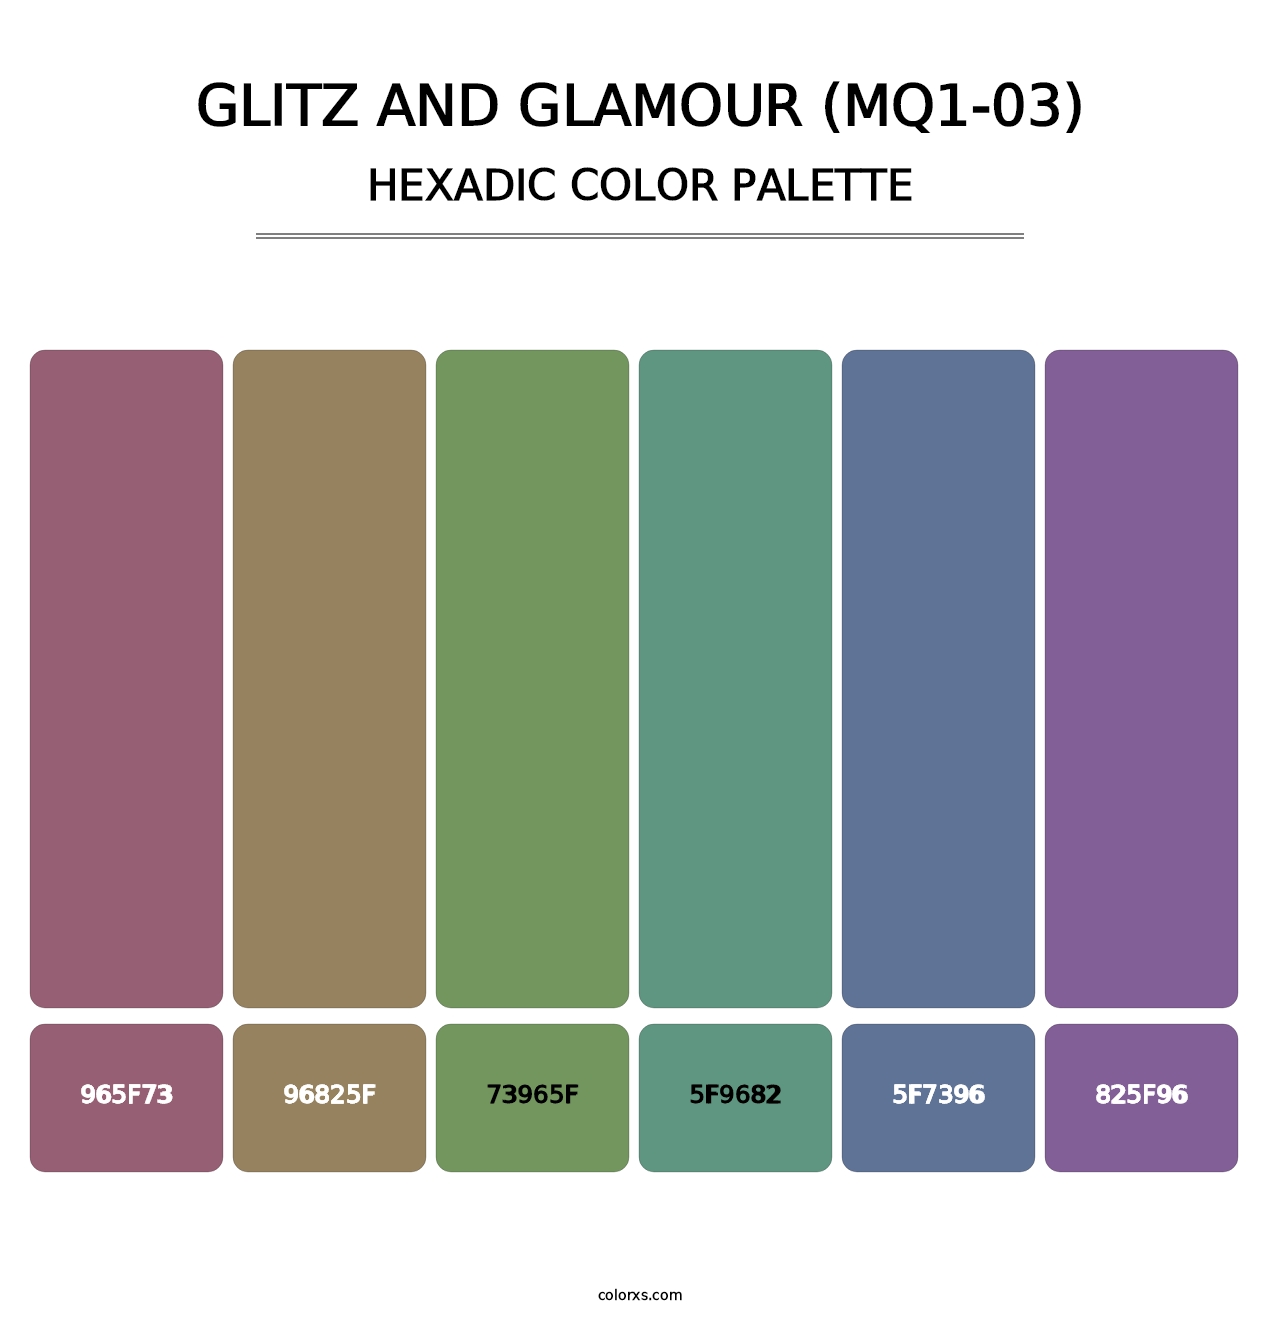 Glitz And Glamour (MQ1-03) - Hexadic Color Palette